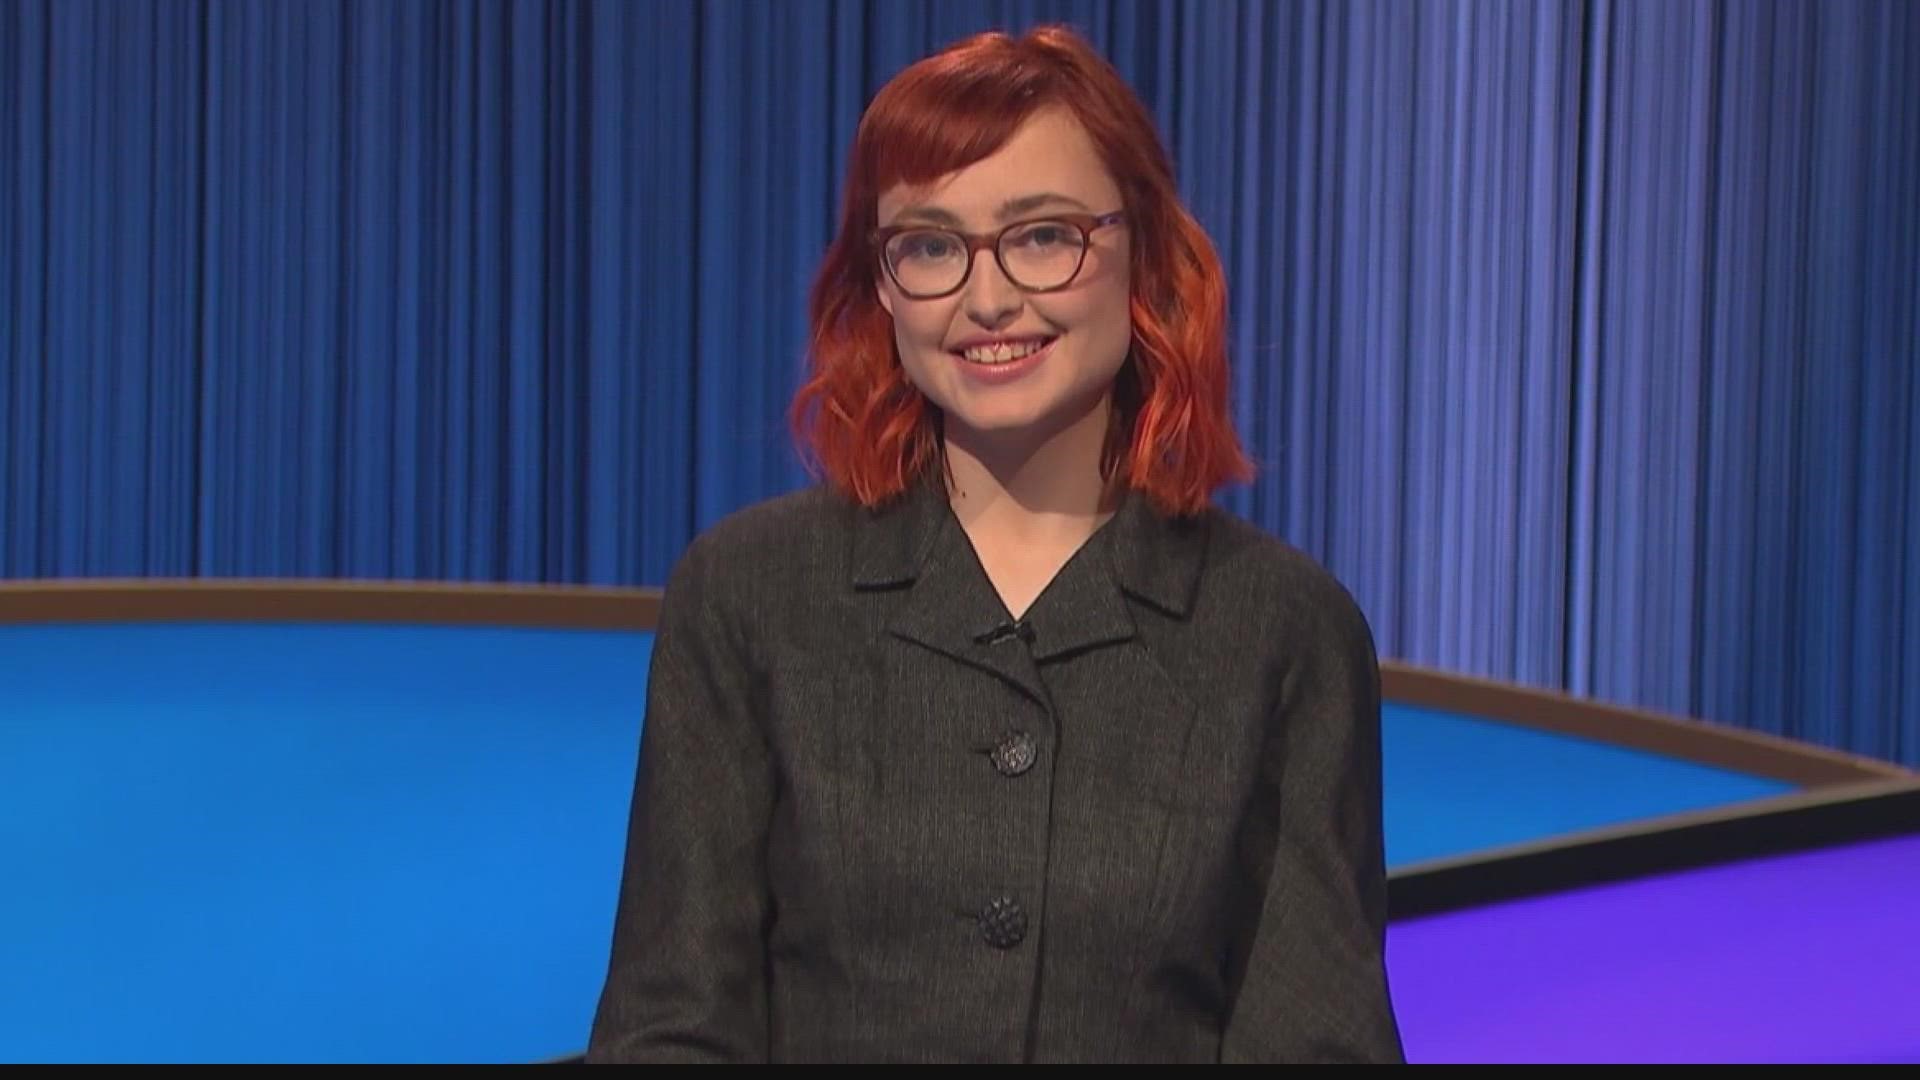 Emmie T. of Jacksonville had just a month to prepare to Jeopardy! appearance